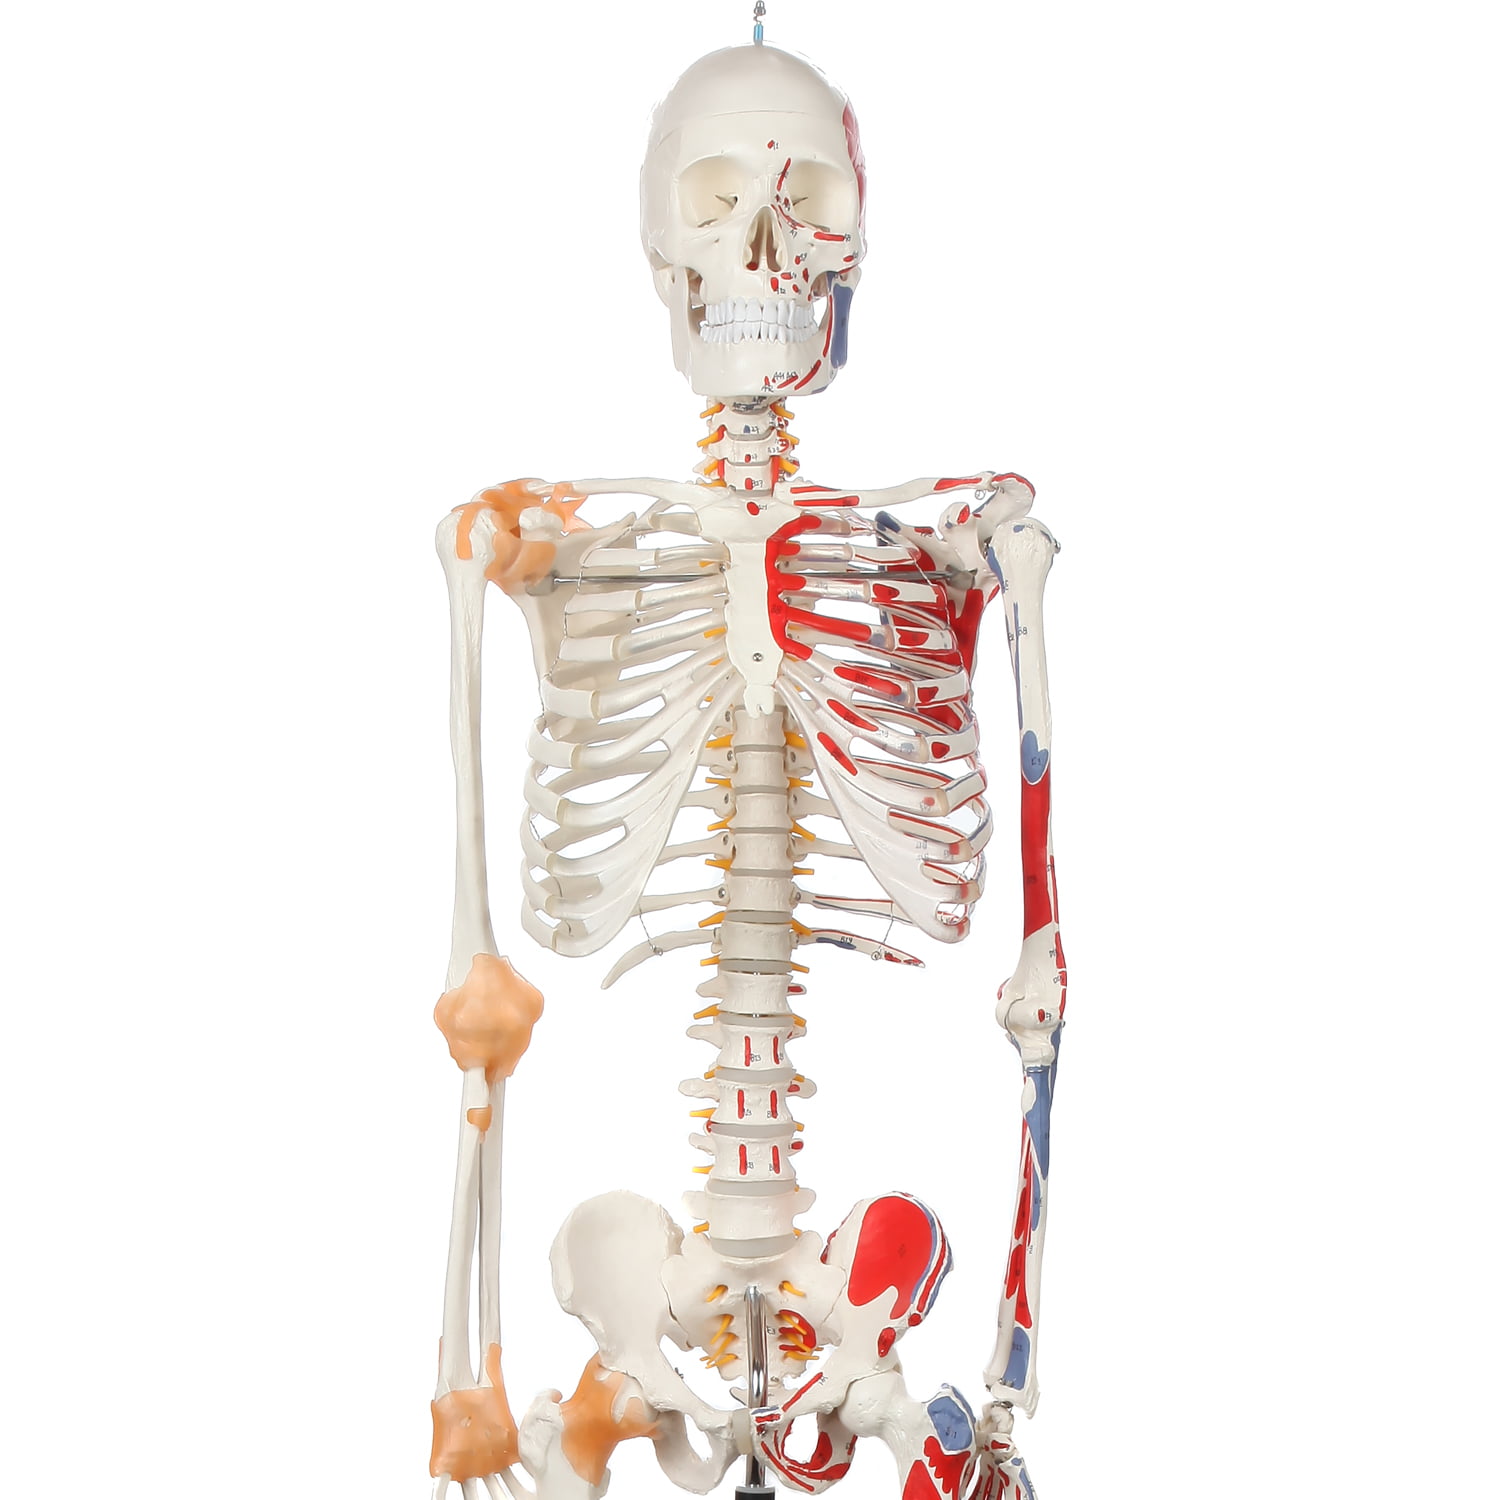 Detailed Product Manual Axis Scientific Painted and Numbered Life Size Skeleton Model Dust Cover 3-Year Warranty Full Size Human Skeleton has Muscle Insertion and Origin Points Includes Base